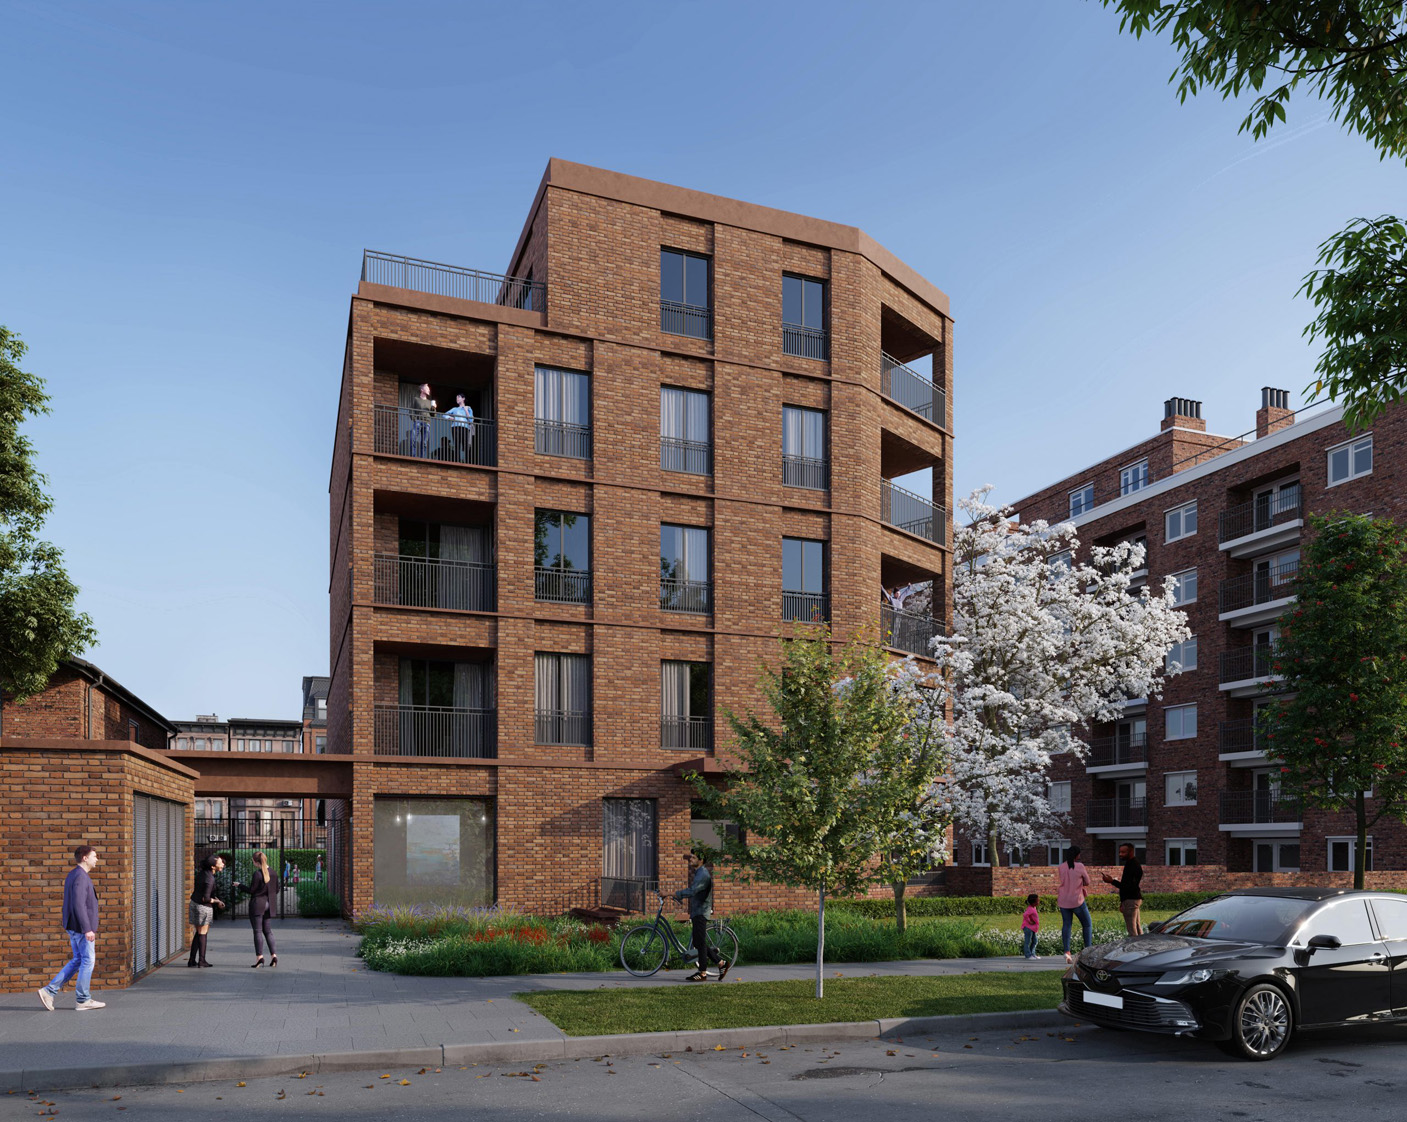 A new model for building more and better homes for the people of Lambeth